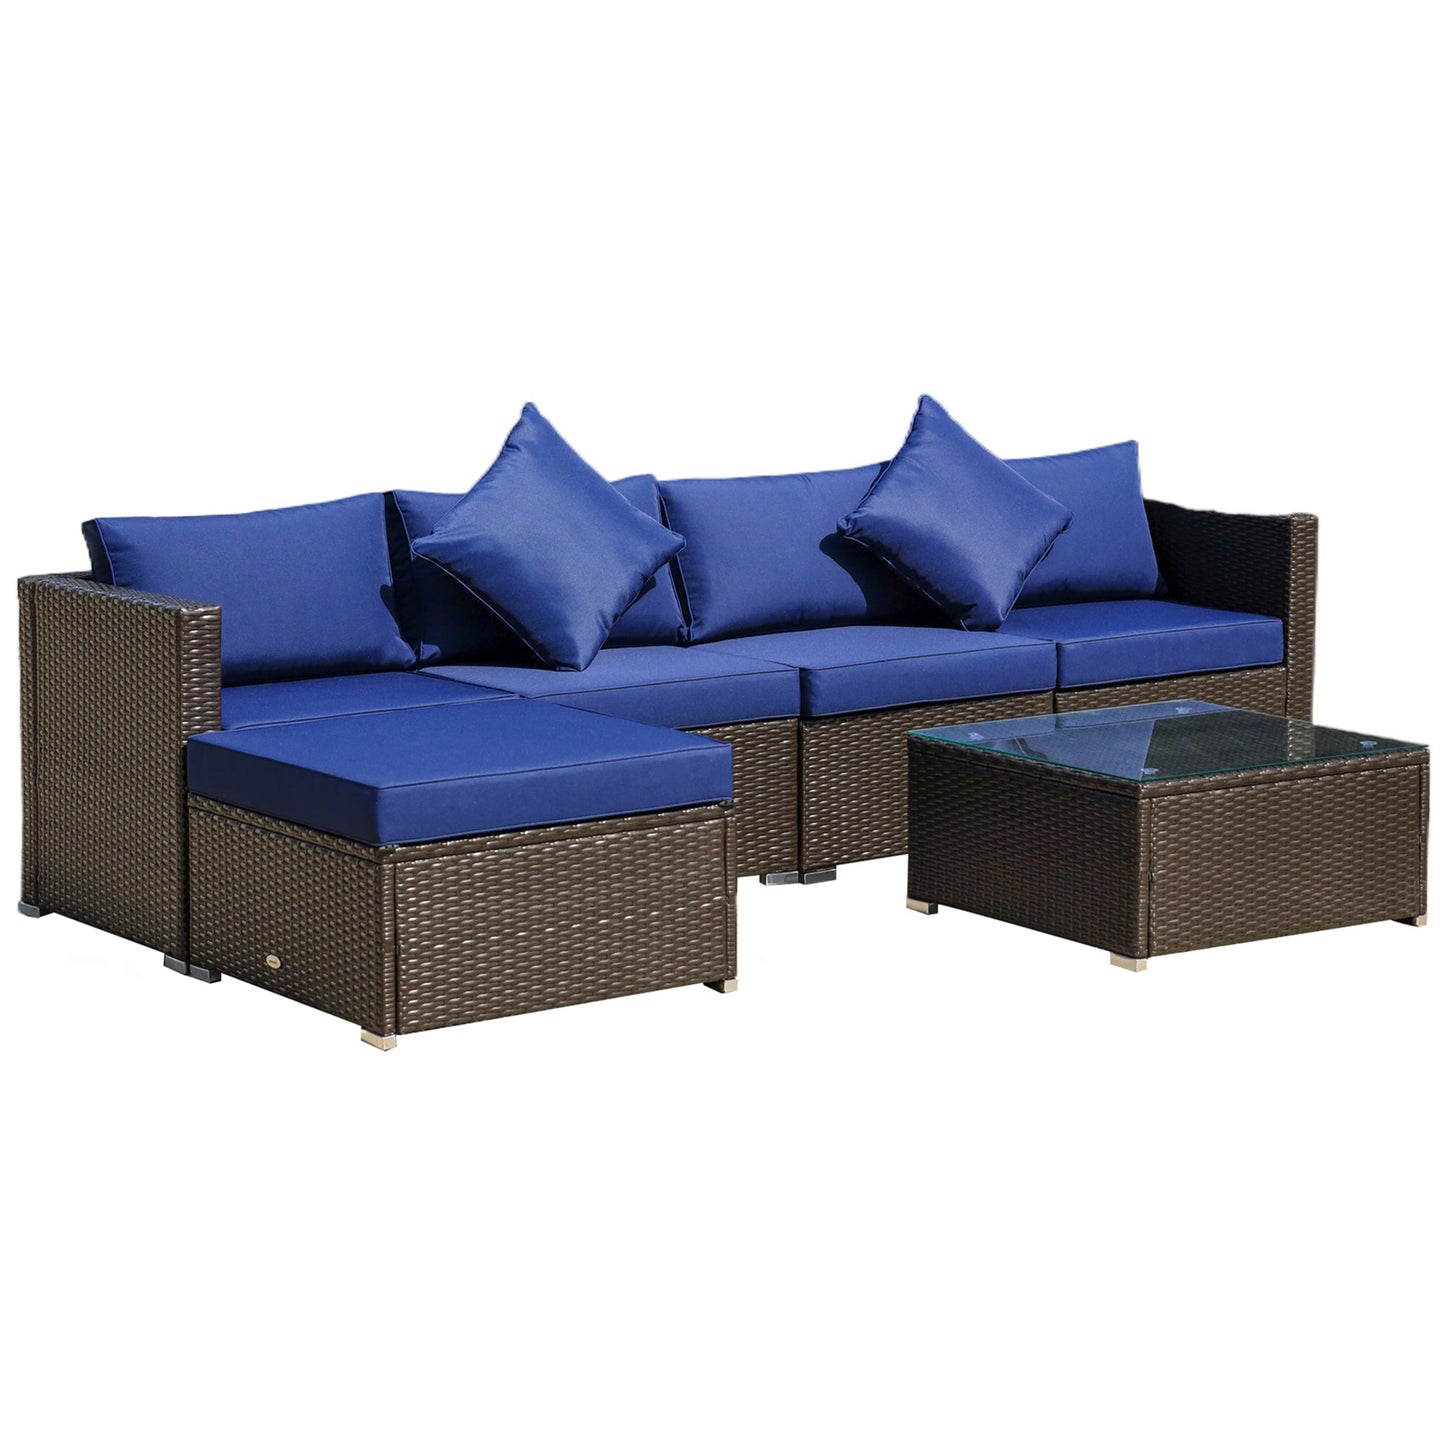 Outdoor and Garden-6 Pieces Outdoor PE Rattan Sofa Set, Sectional Conversation Wicker Patio Couch Furniture Set with Cushions and Coffee Table, Blue - Outdoor Style Company